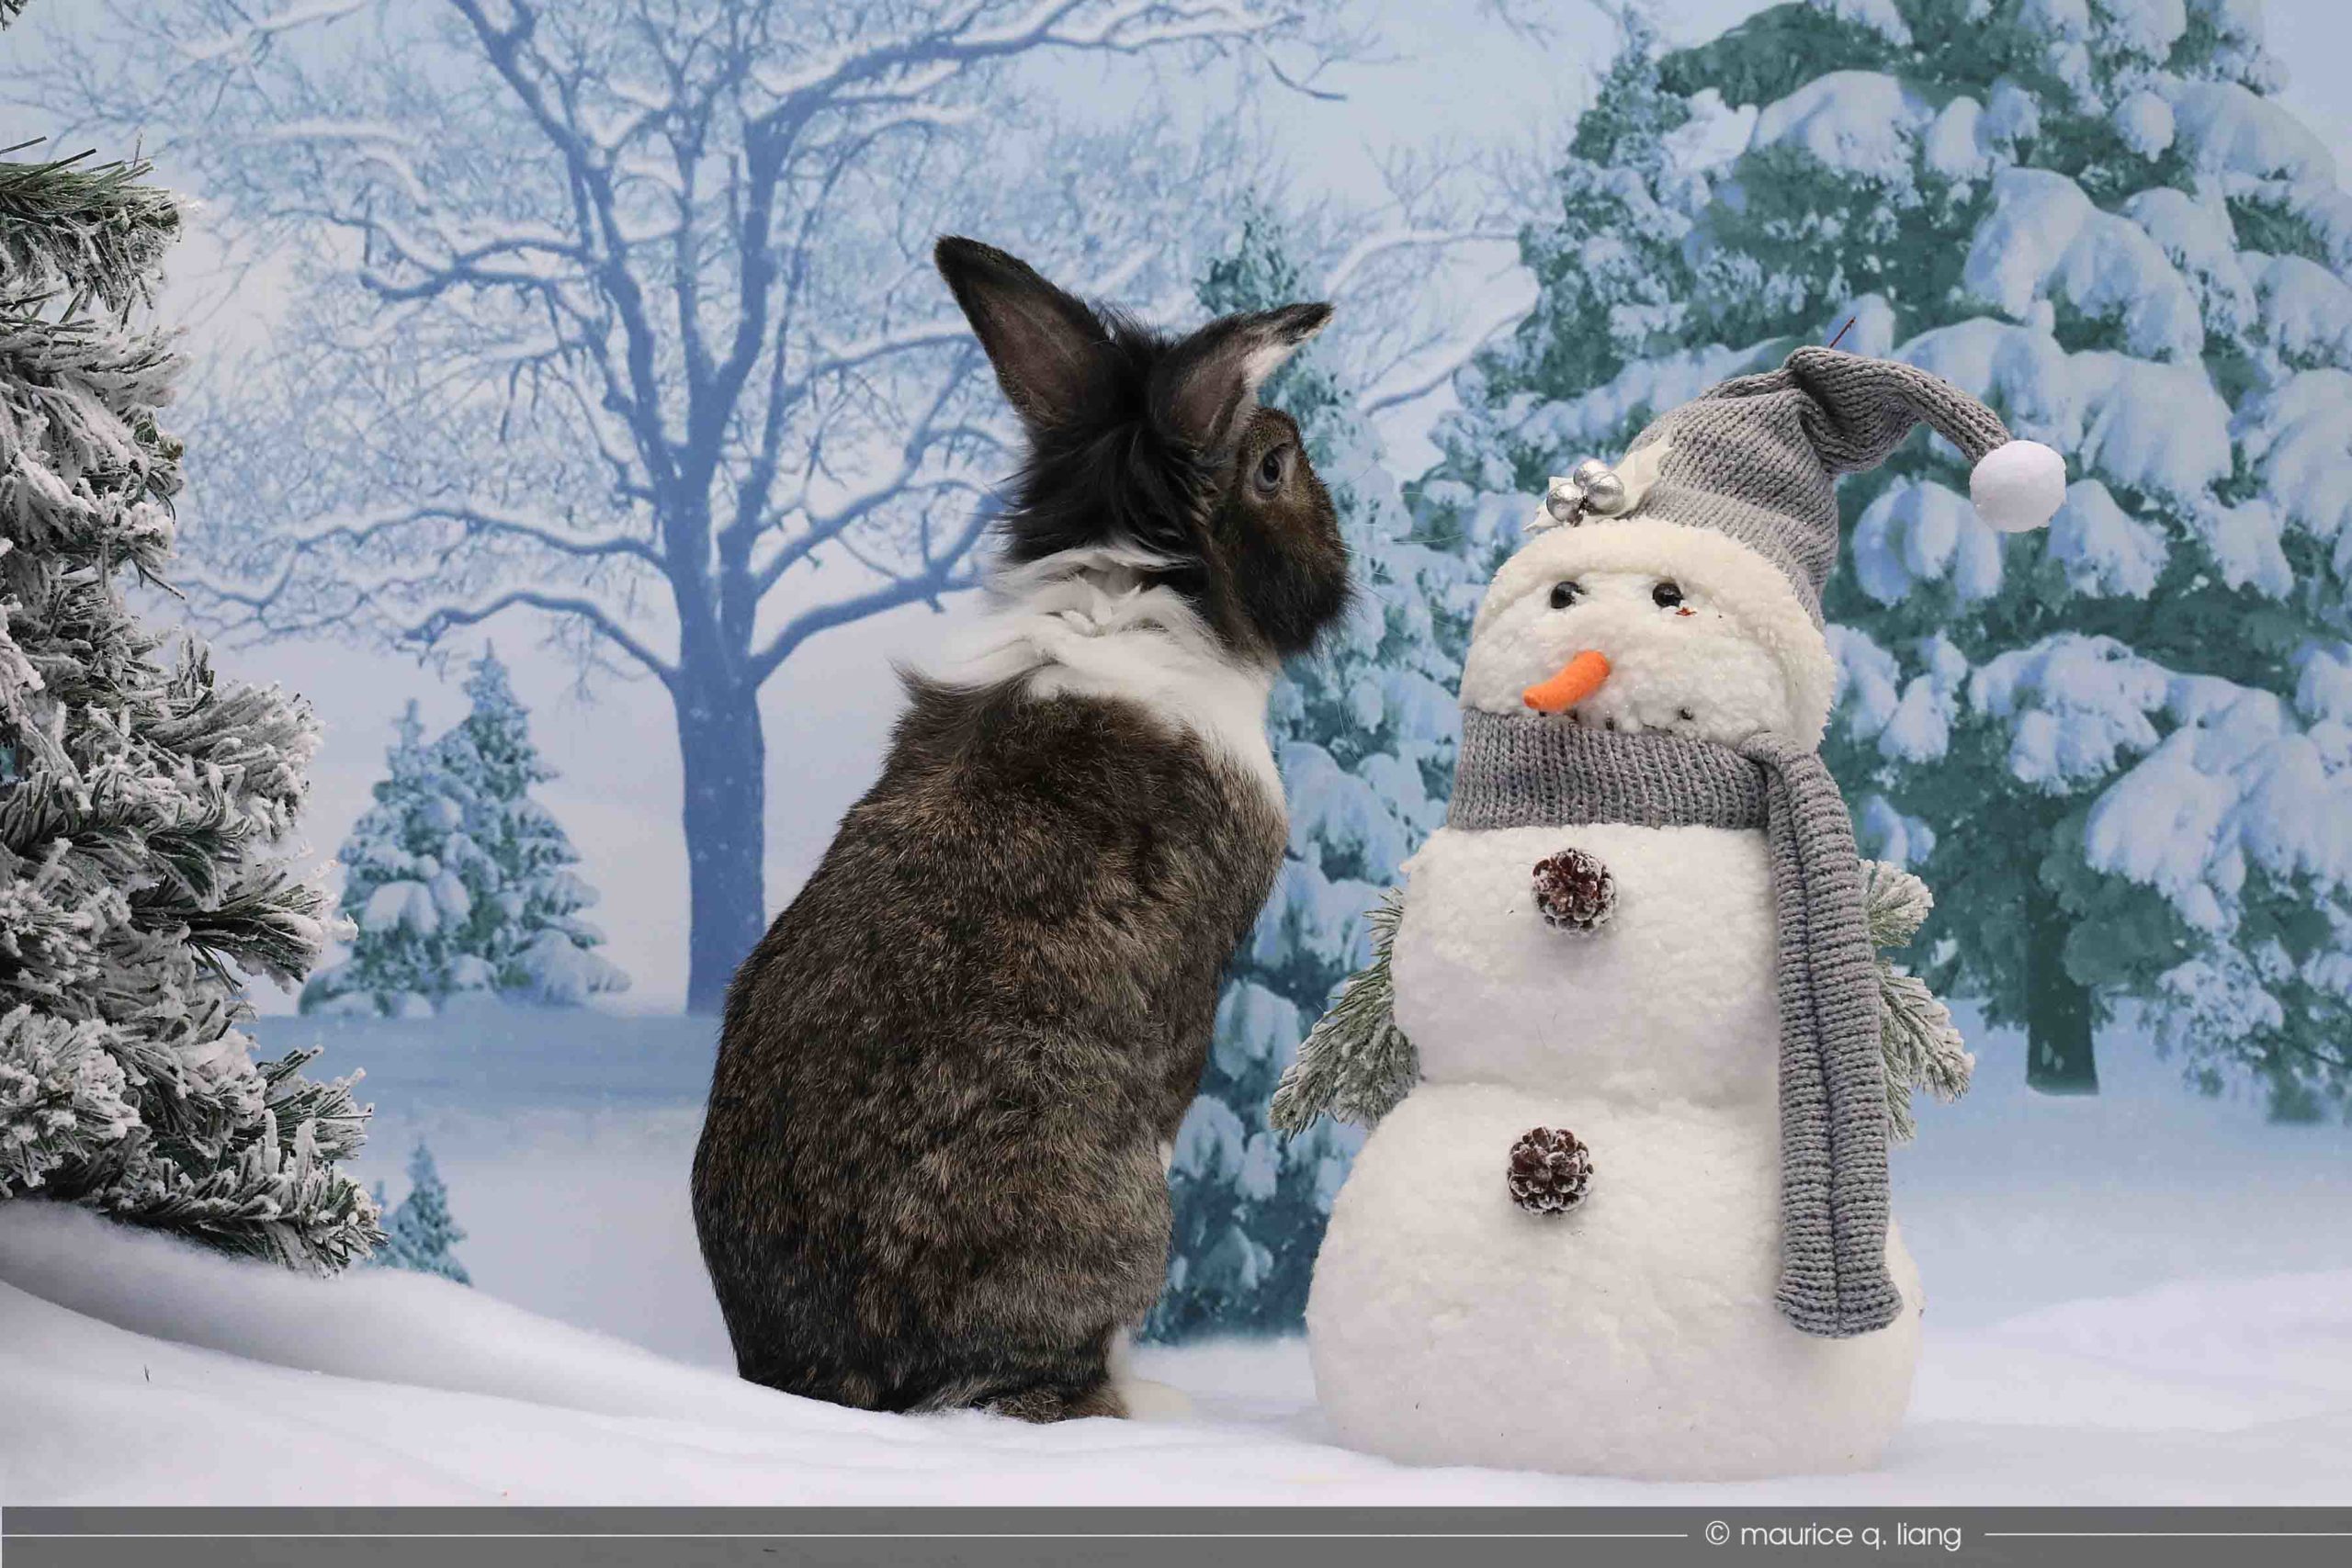 Enzo is curious about the snowman's carrot nose.